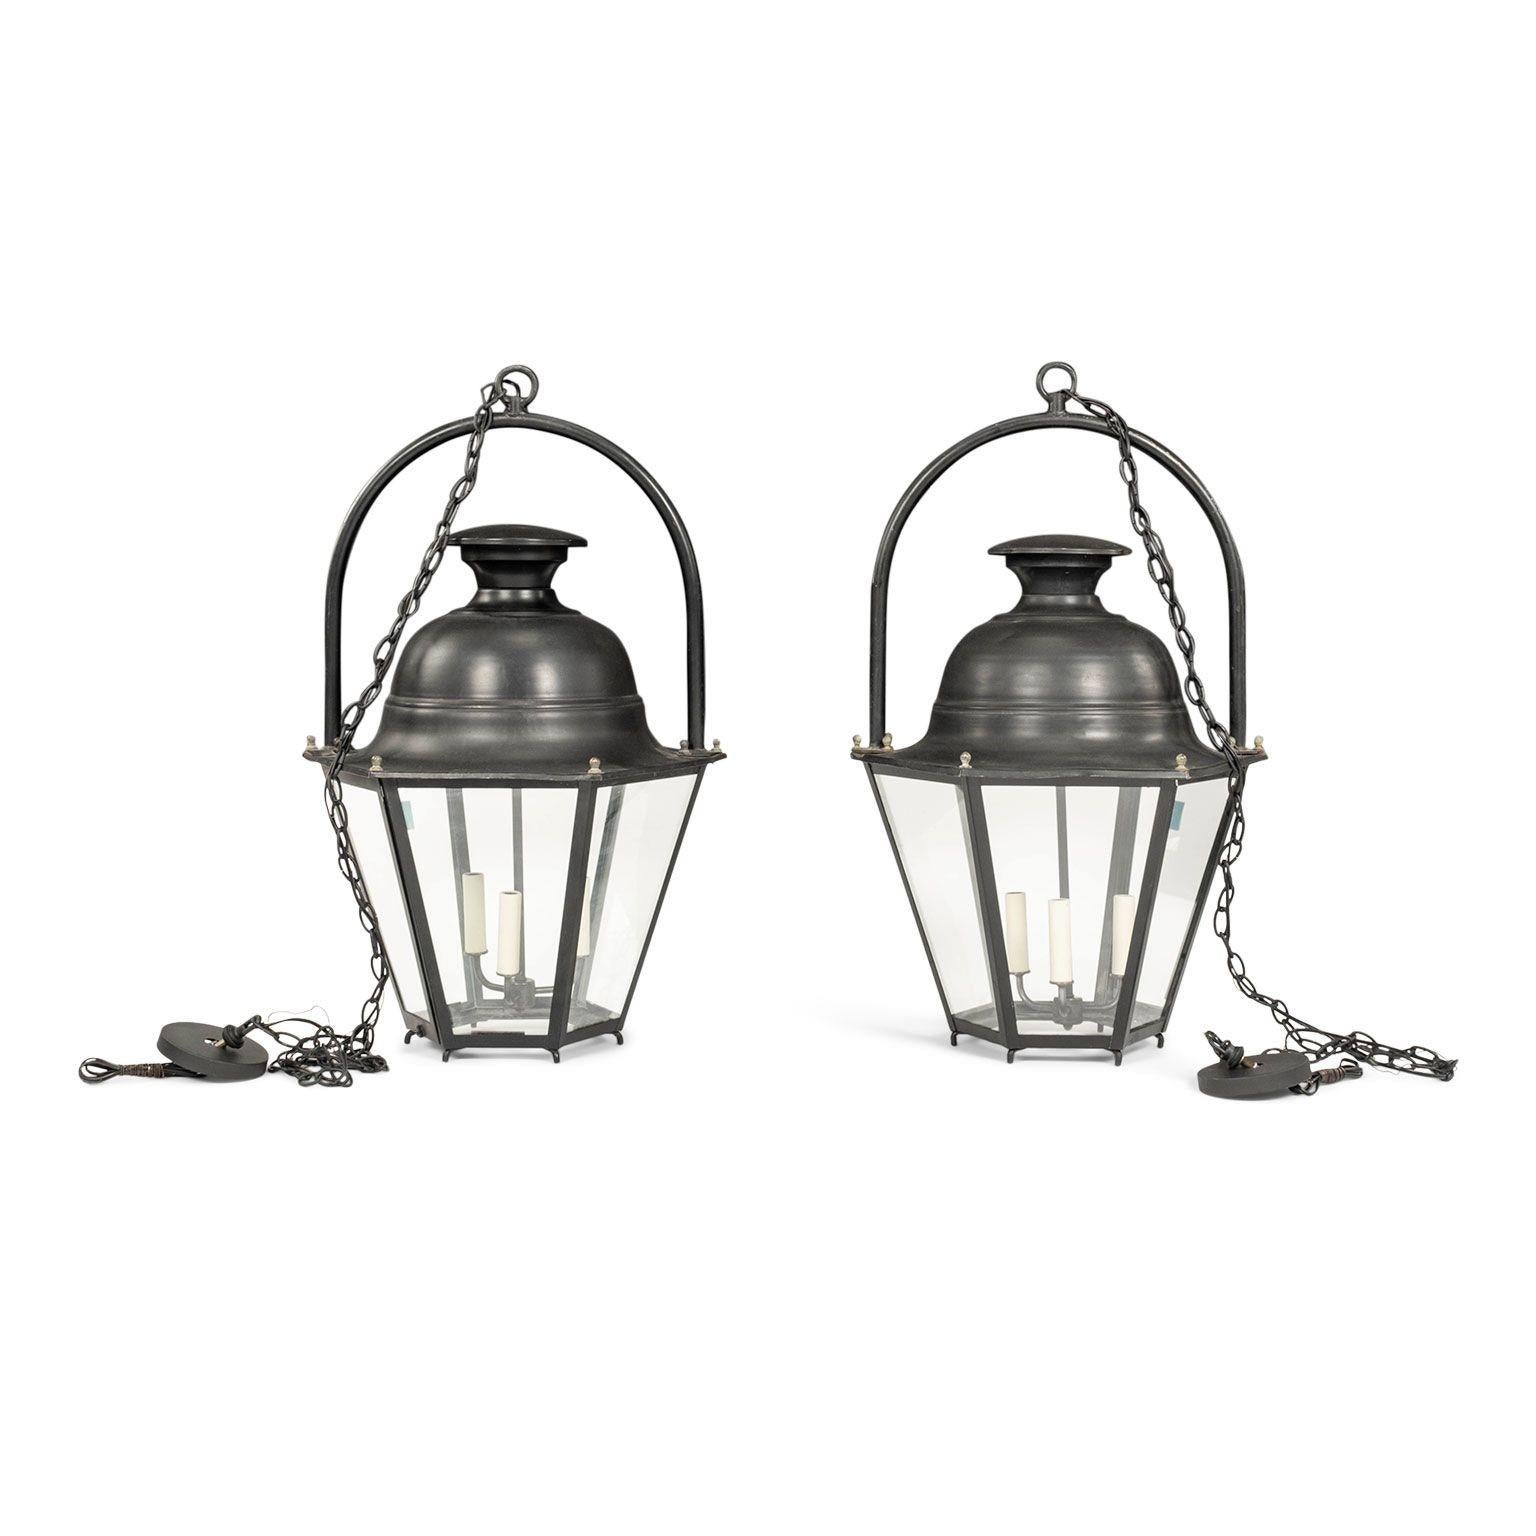 Black-painted hexagonal street lantern from the South of France. Newly wired for use within the USA using UL listed parts. Includes chain and canopy (listed height does not include chain). Two available and sold separately priced $4,800 each.